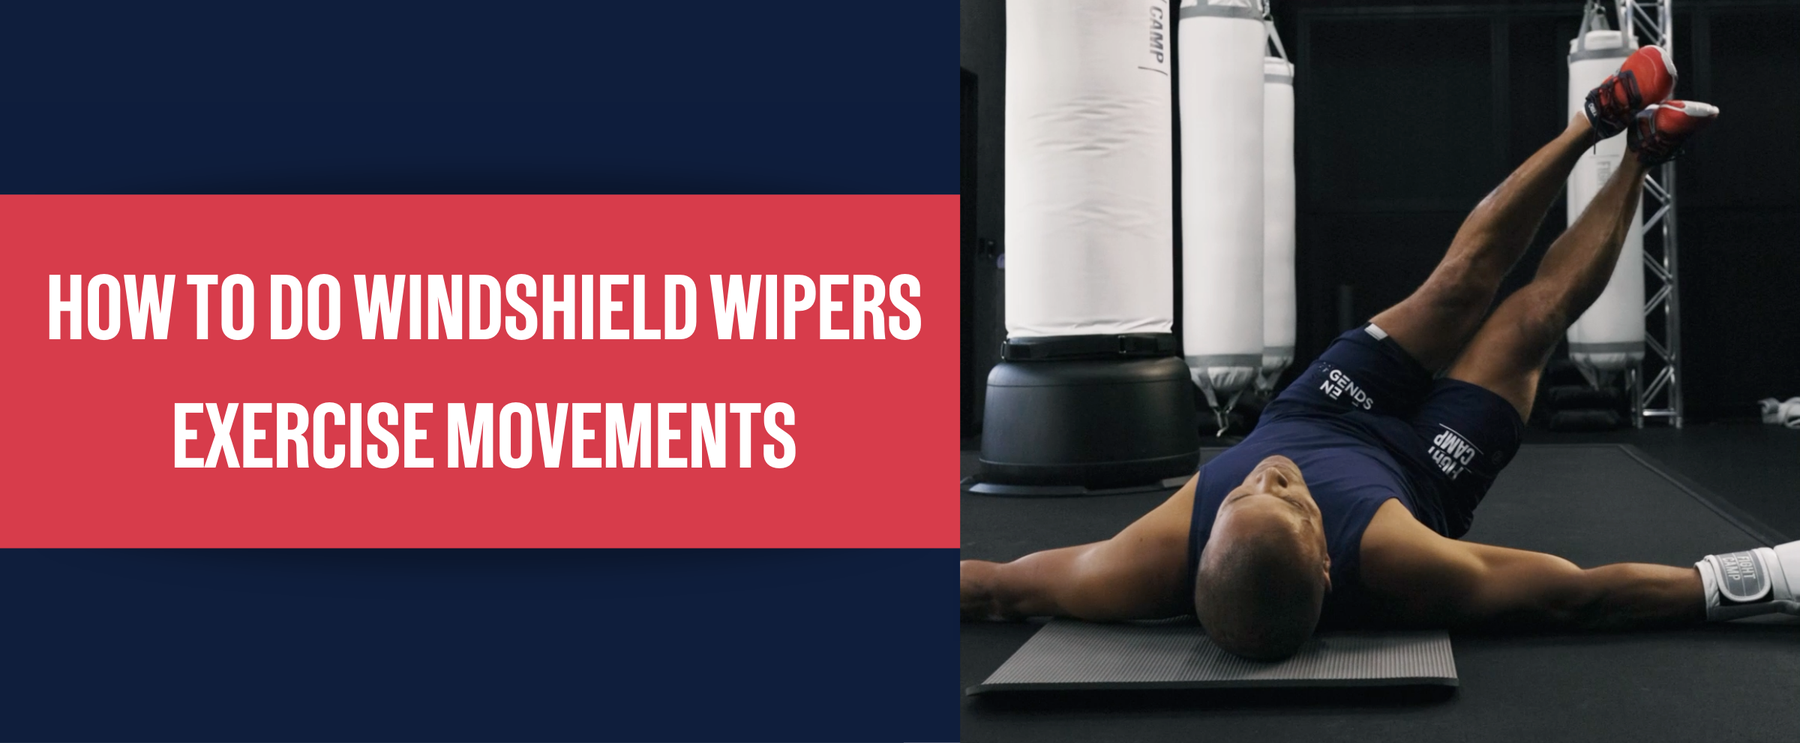 How To Do Windshield Wipers | Exercise Movements